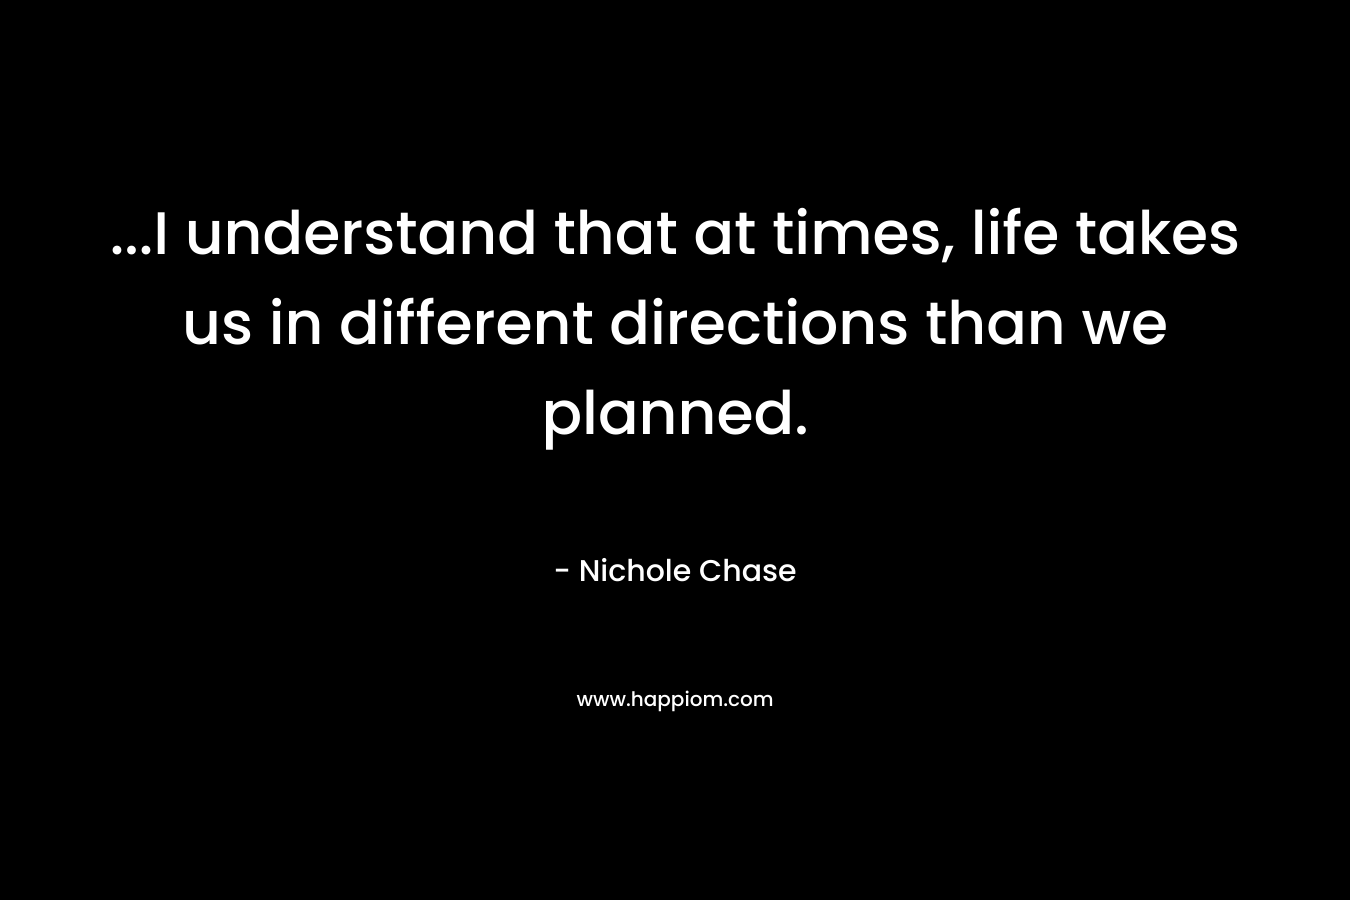 …I understand that at times, life takes us in different directions than we planned. – Nichole Chase